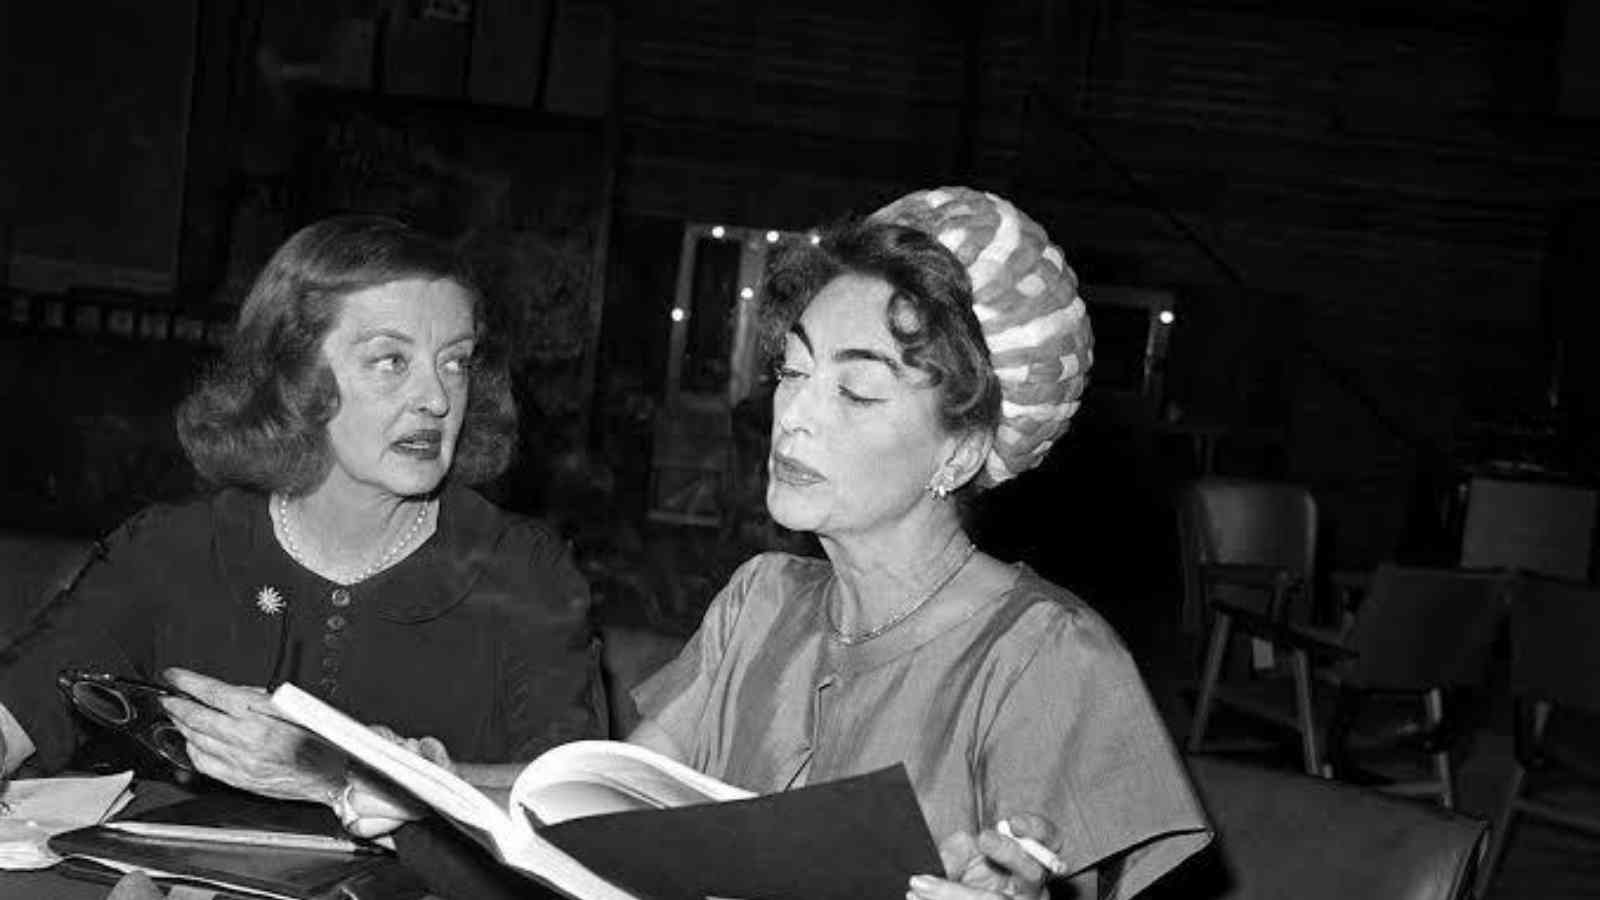 Joan Crawford and Bette Davis' rivalry even inspired the FX show, Feud